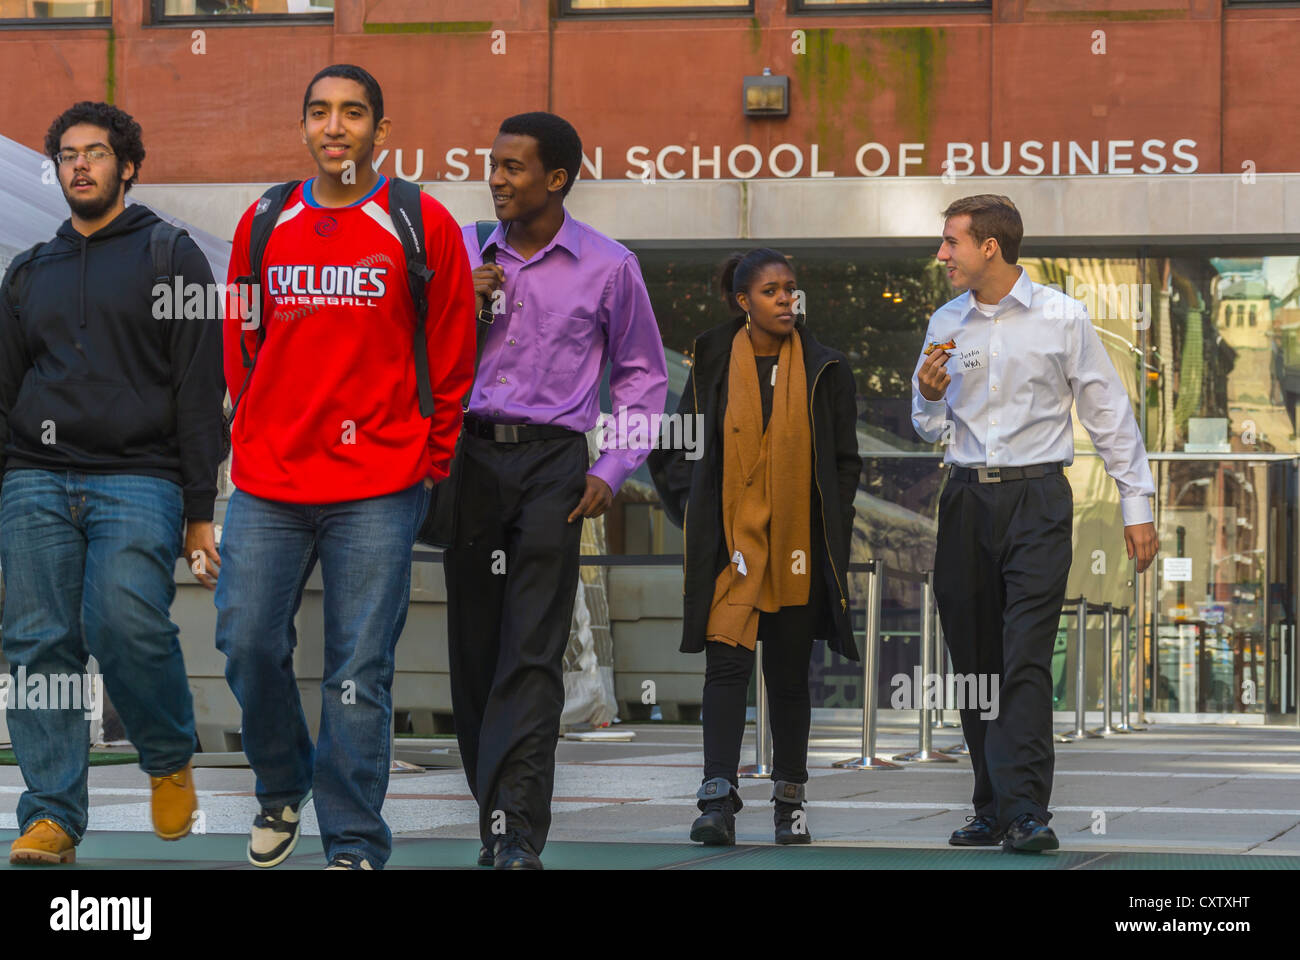 New York City, NY, USA, Group Students Walking at 'New York University' Campus, NYU, 'Sloan School of Business', in Greenwich Village, Schools from around the world, university campus talking, multicultural street, multiracial citizens Stock Photo